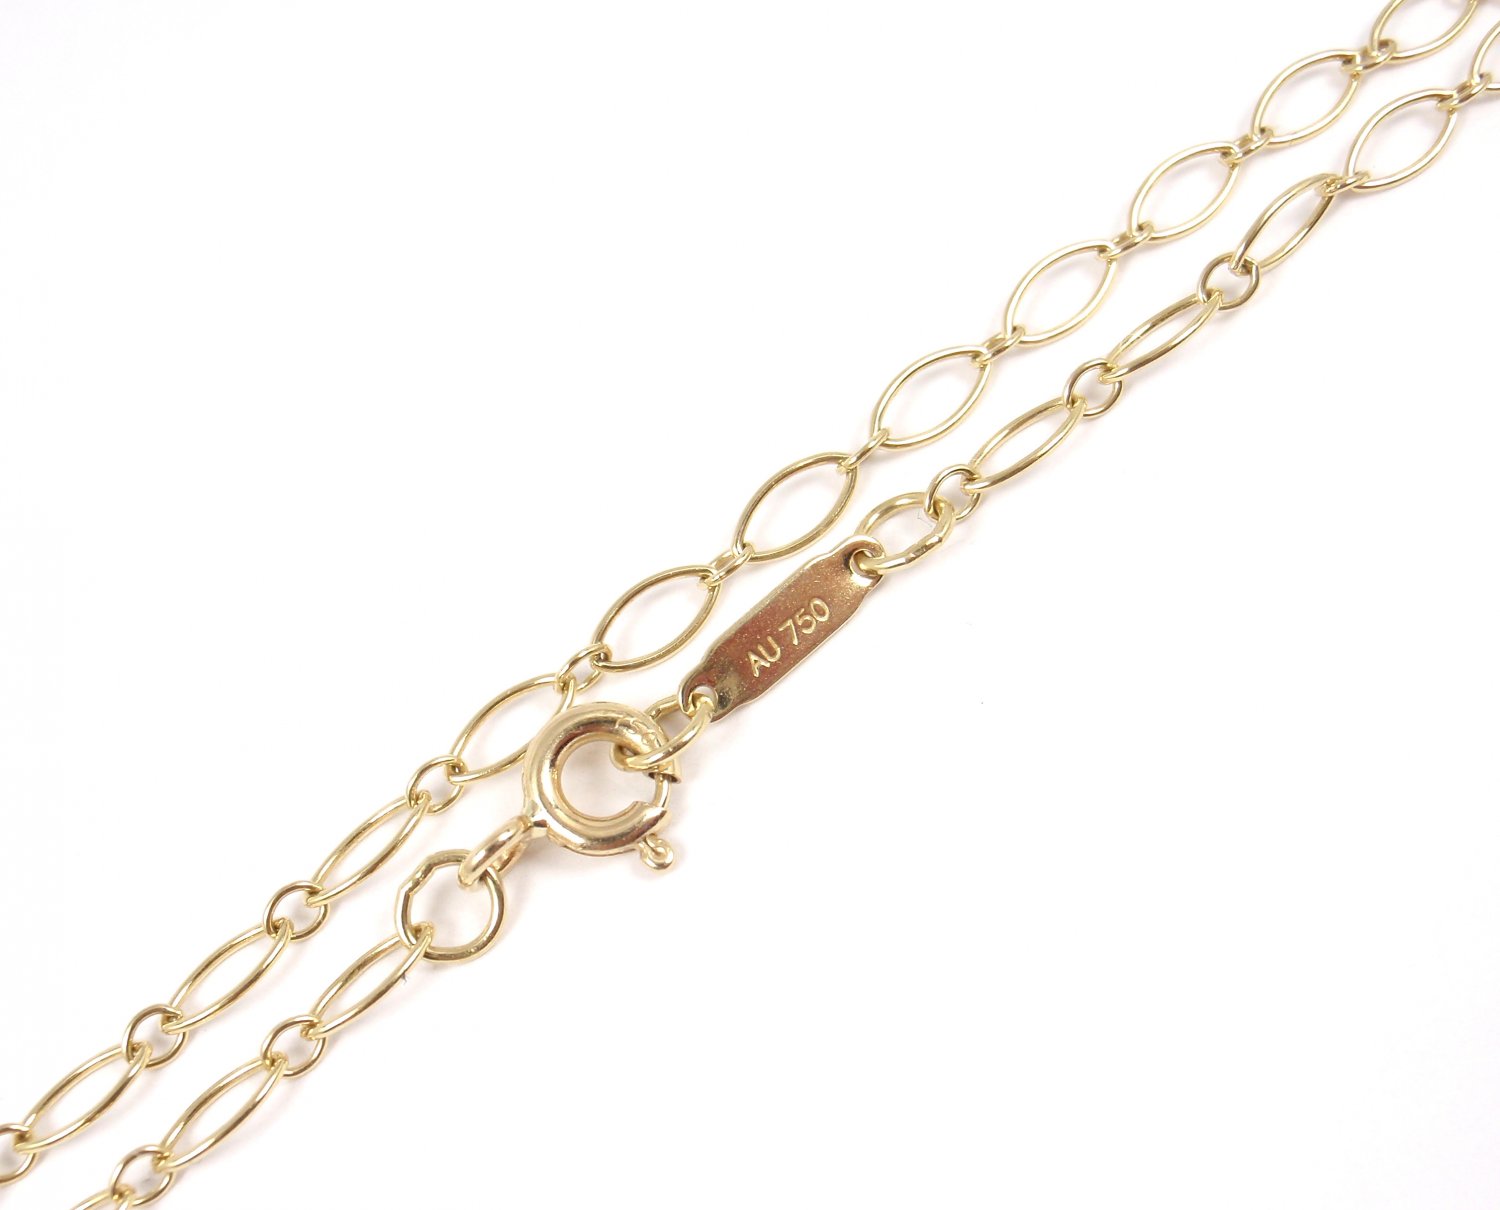 Tiffany & Co 18K Yellow Gold Oval Link Chain Necklace 16